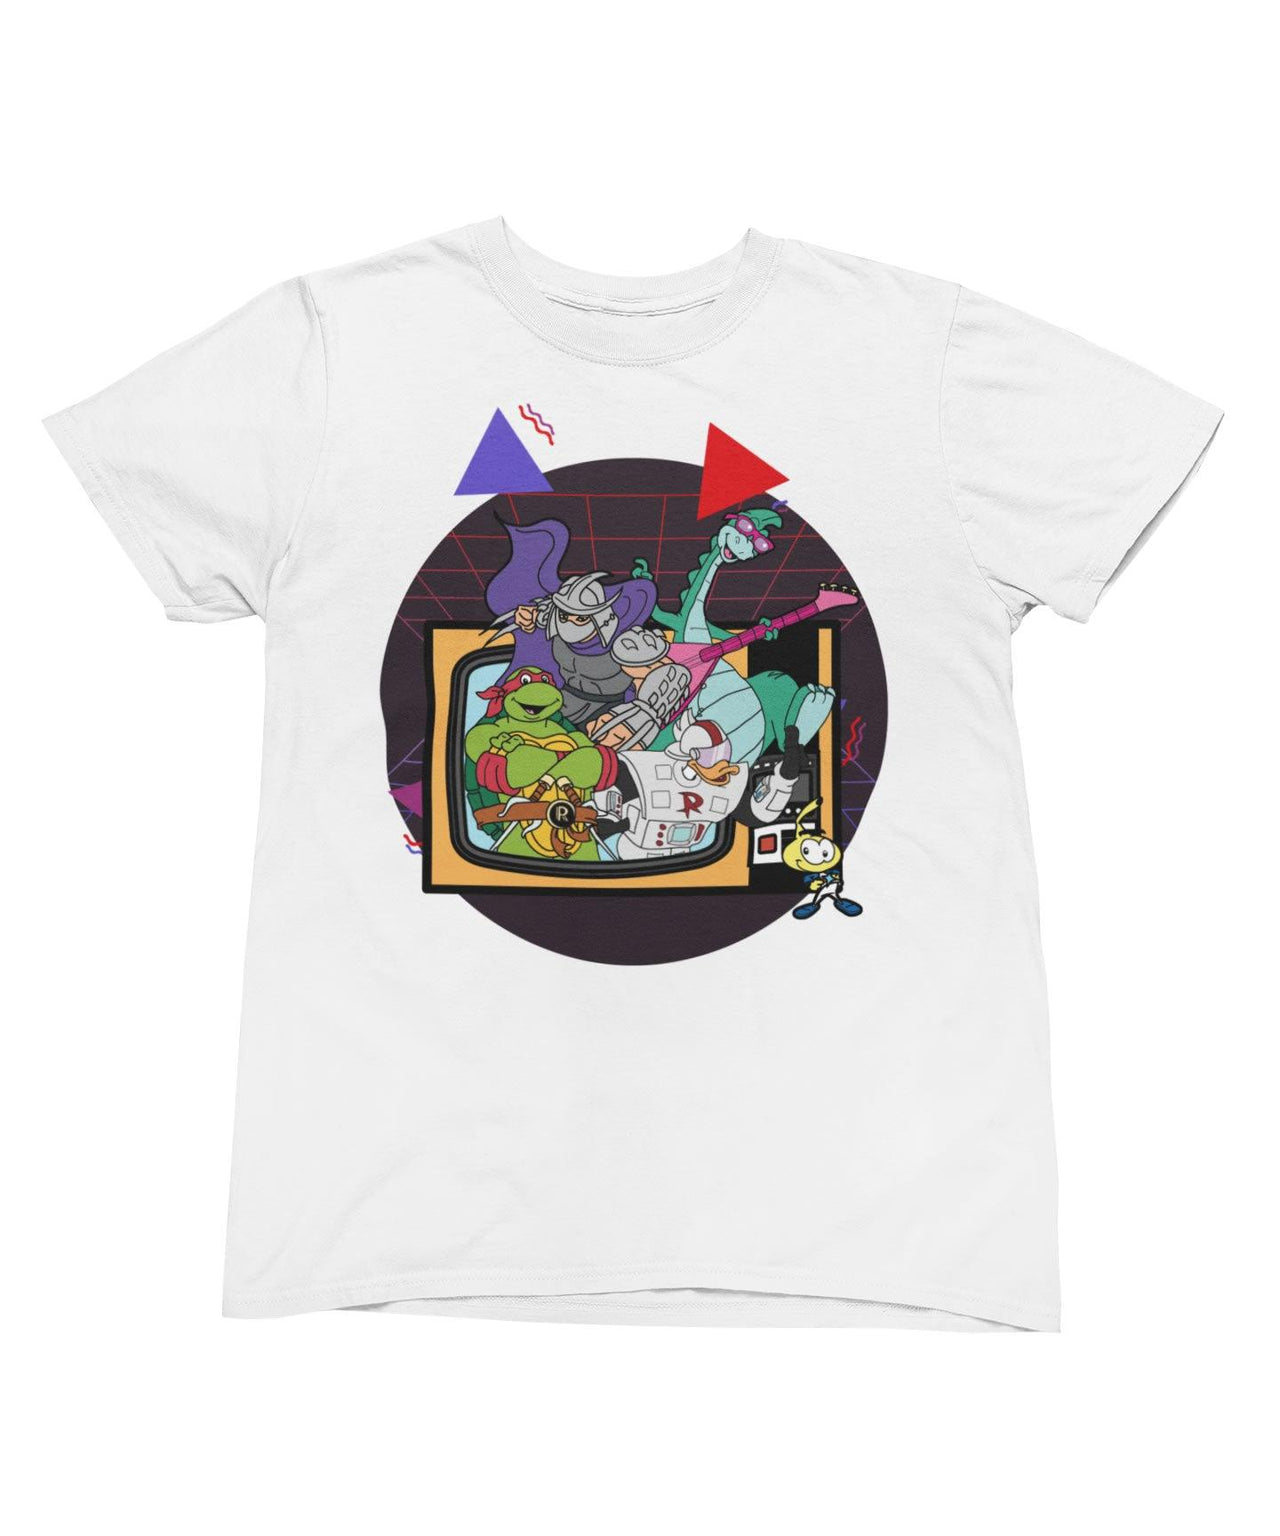 Top Notchy TV Toons Number 5 Men's/Unisex Unisex T-Shirt For Men And Women 8Ball